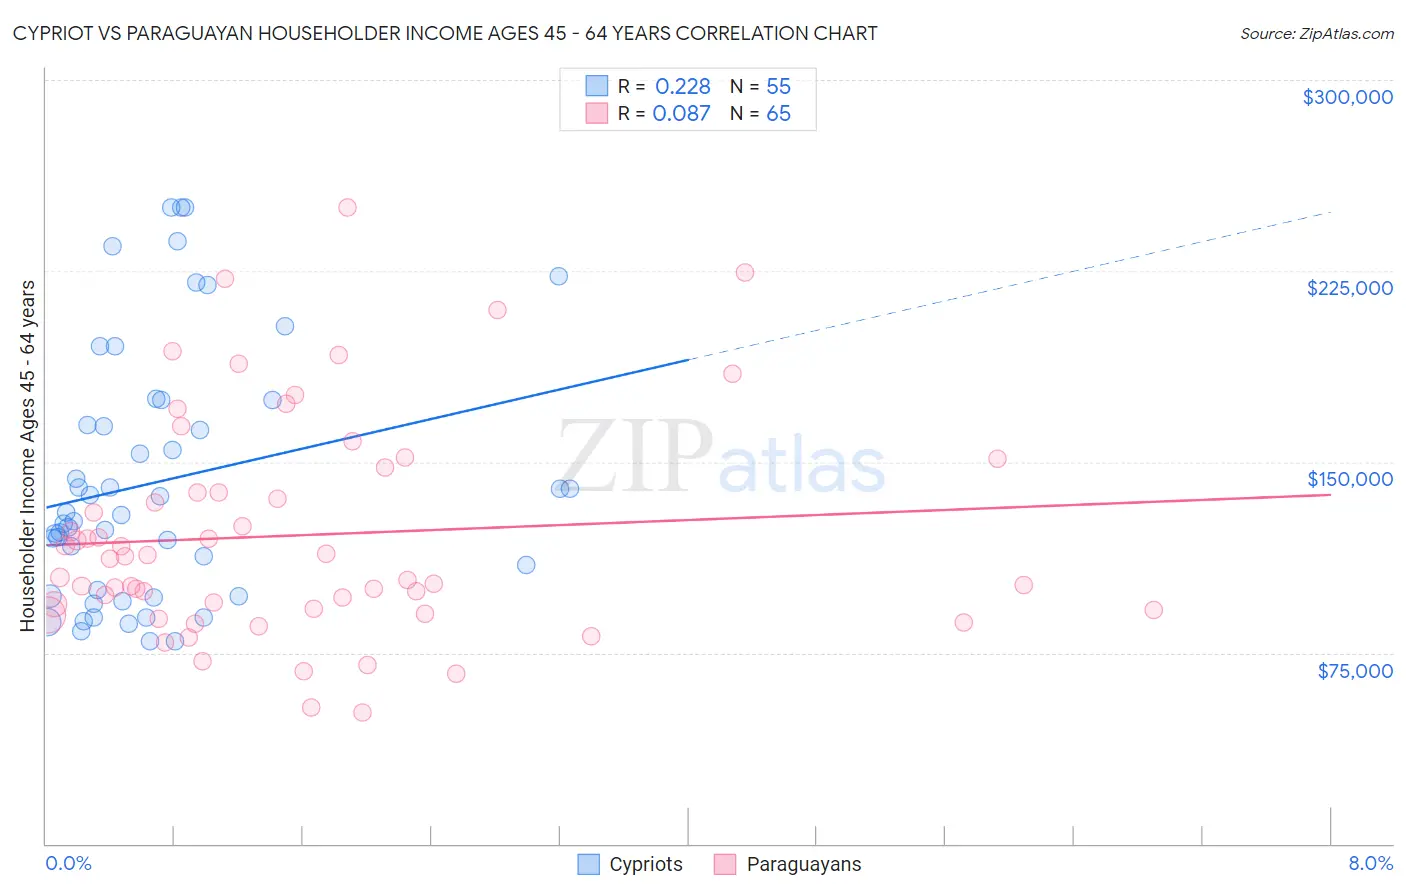 Cypriot vs Paraguayan Householder Income Ages 45 - 64 years